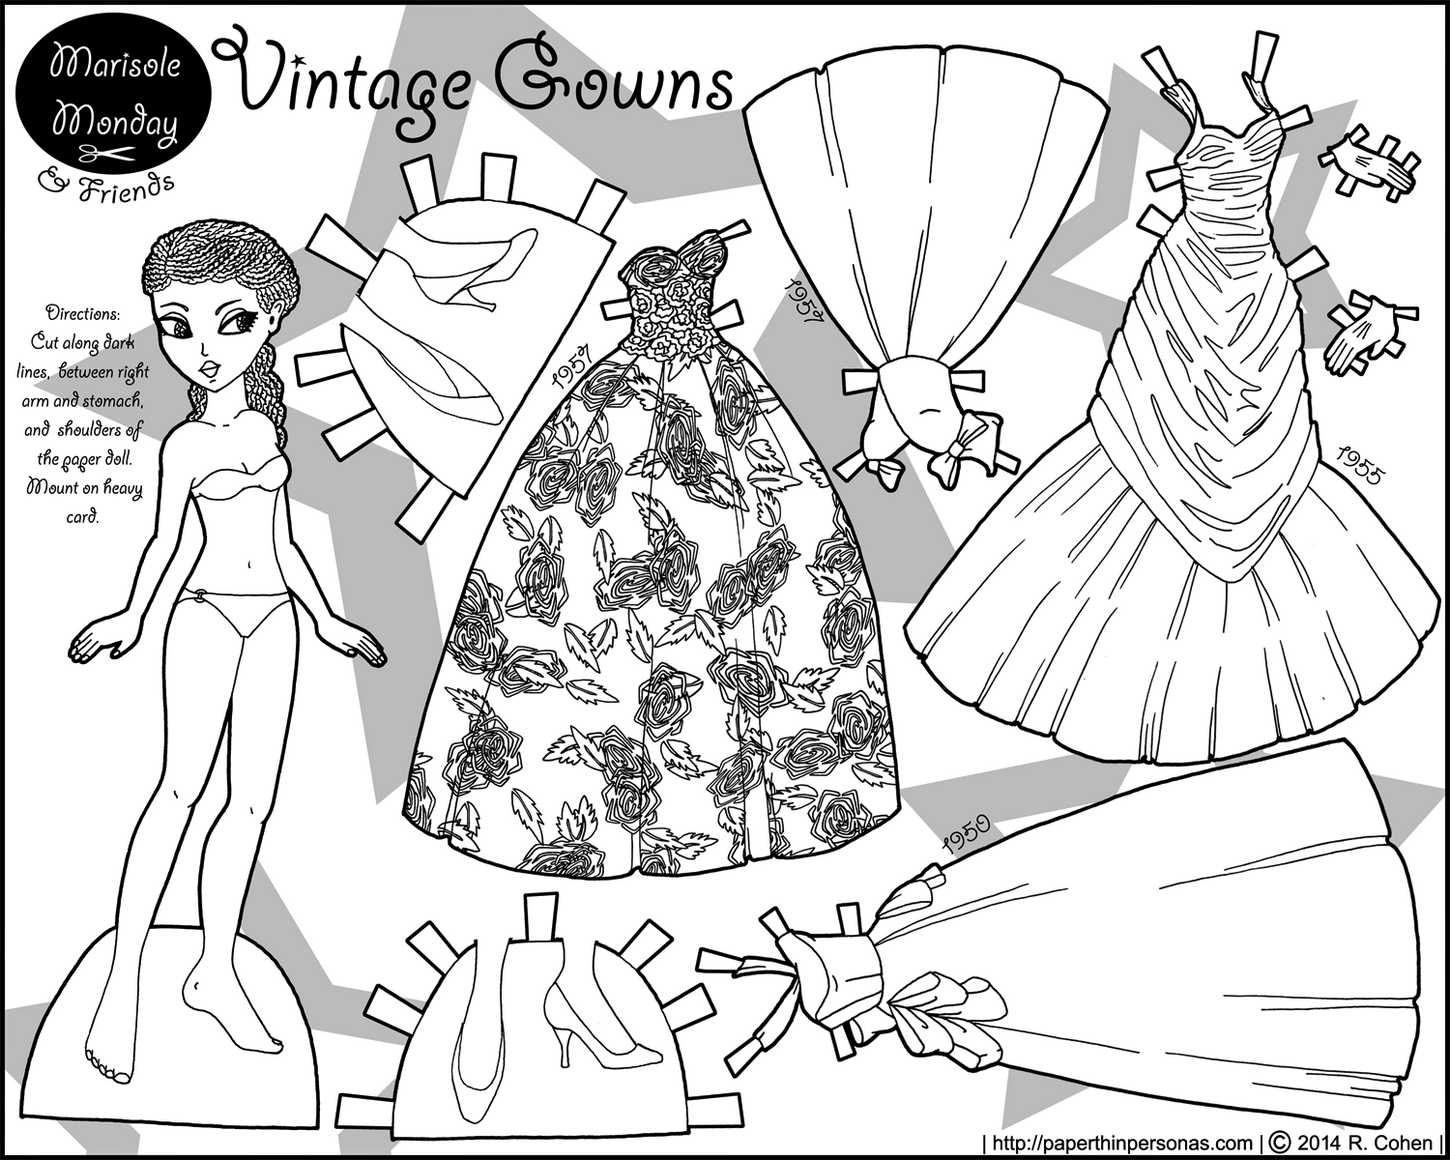 Paper Doll Vintage Gowns Coloring Page